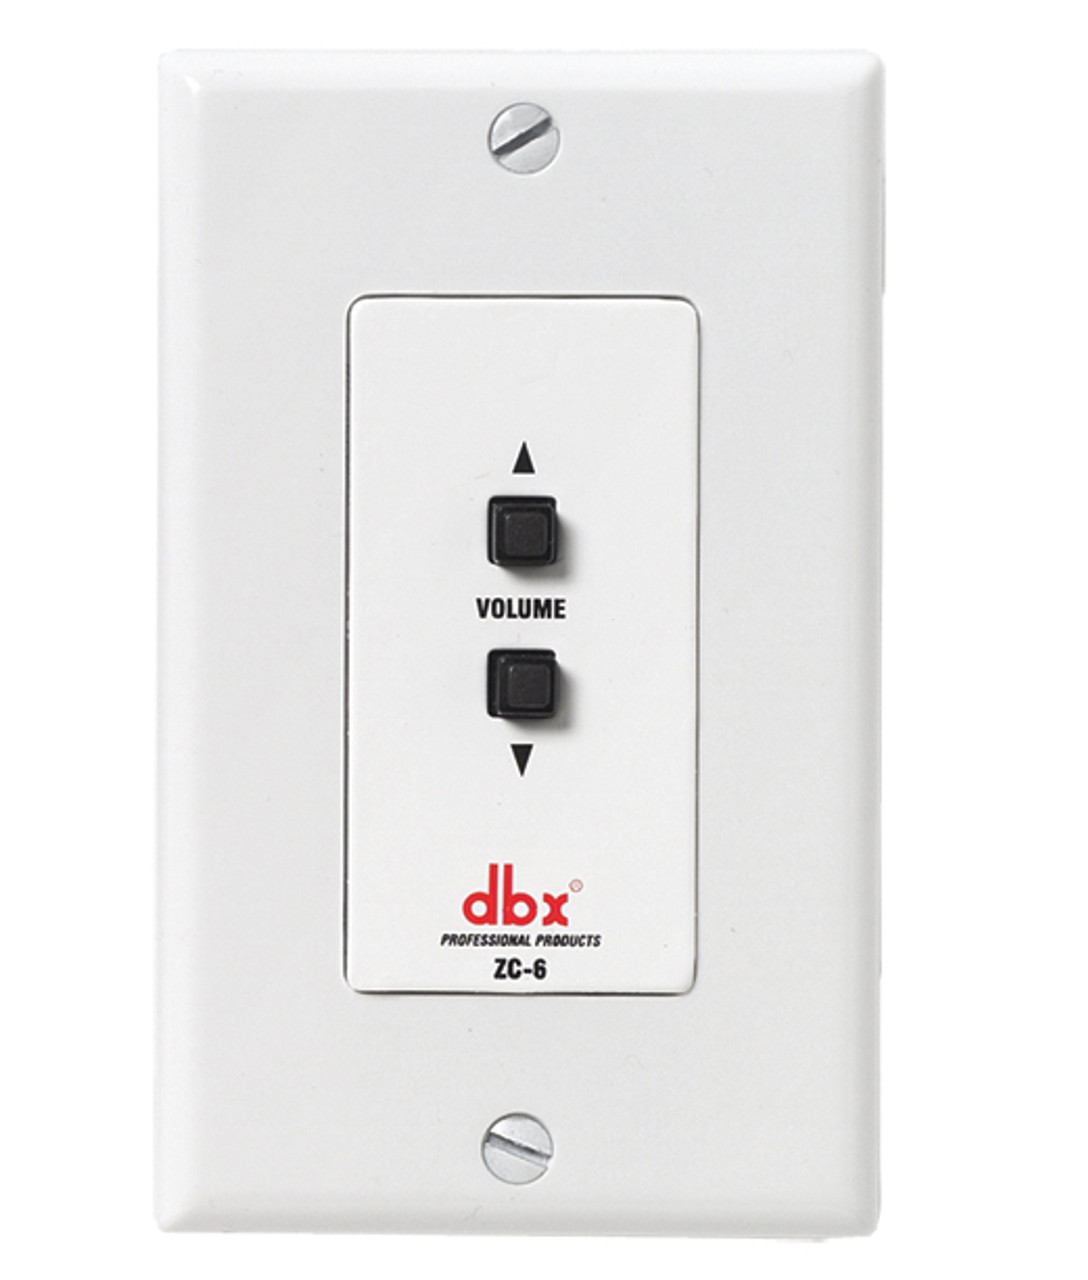 DBX DBXZC6V Six Wall Mounted Push Button Up/Down Controller